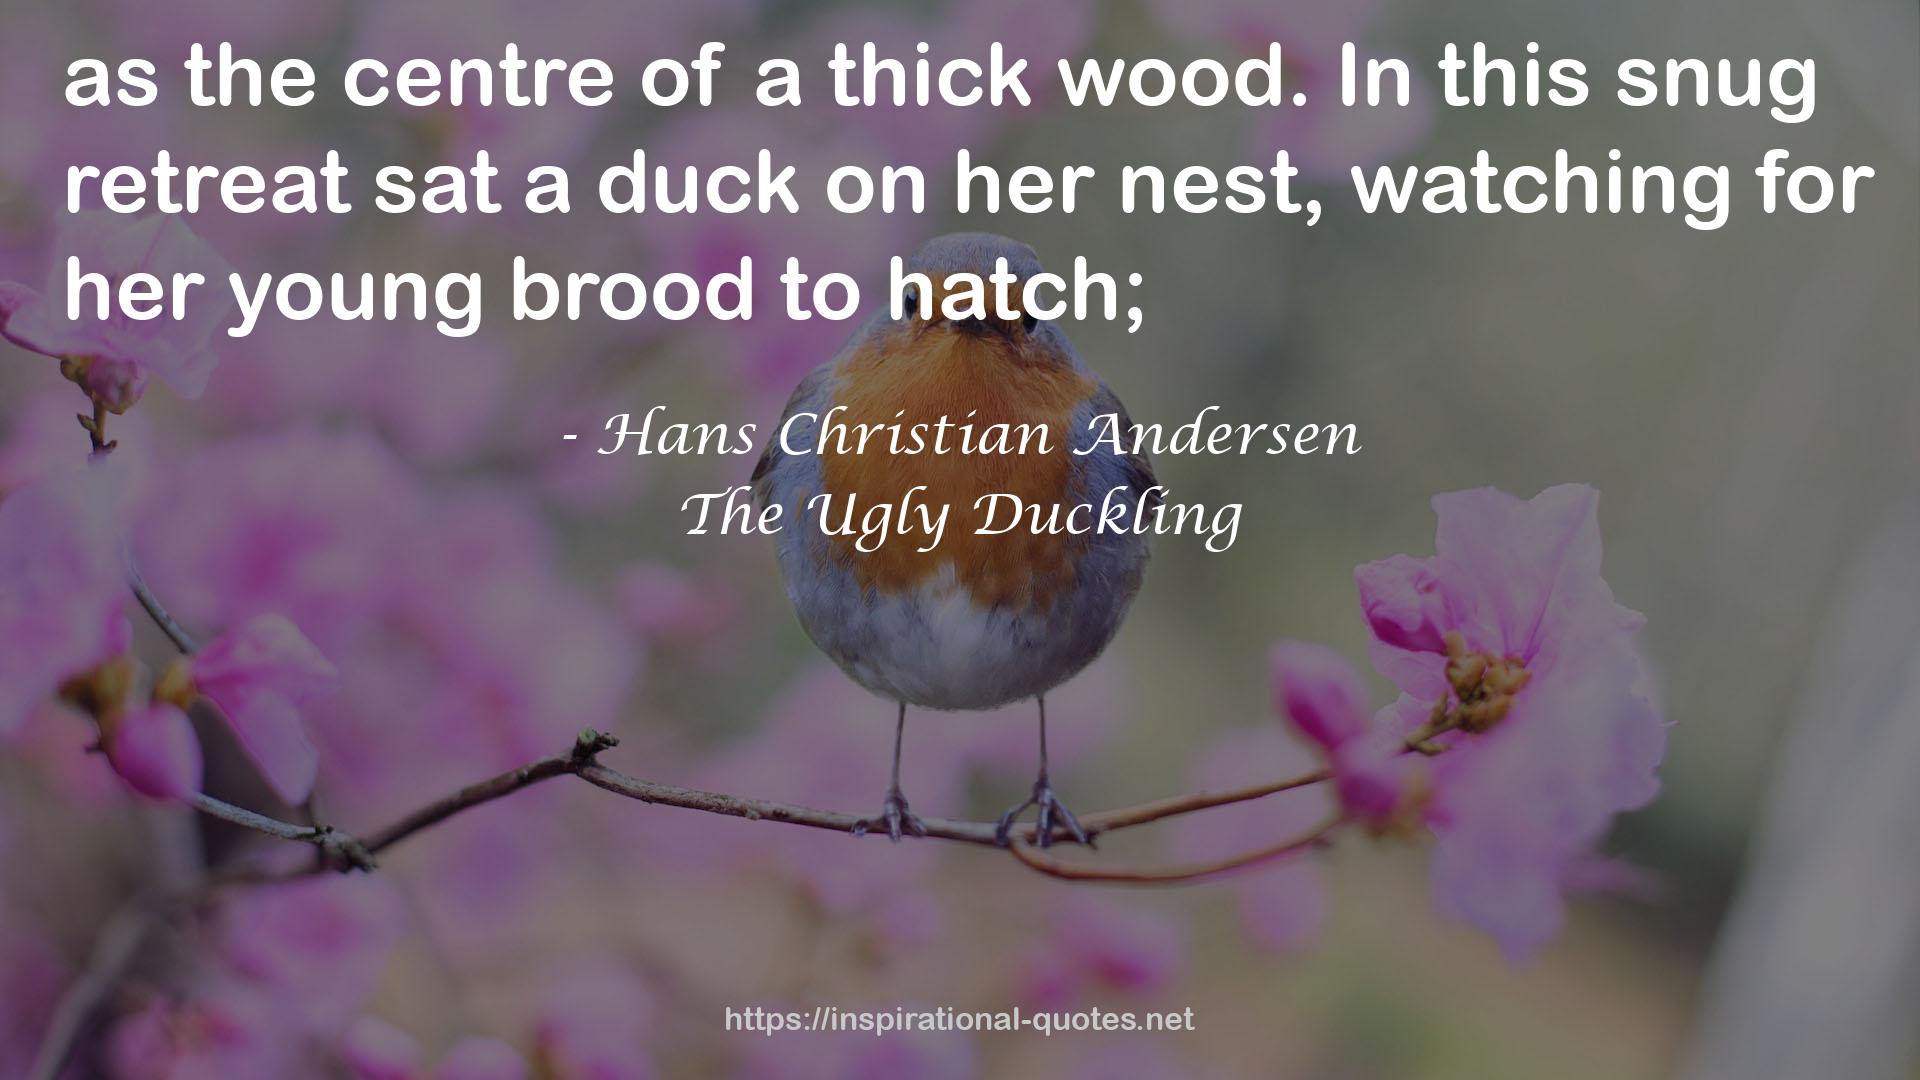 The Ugly Duckling QUOTES